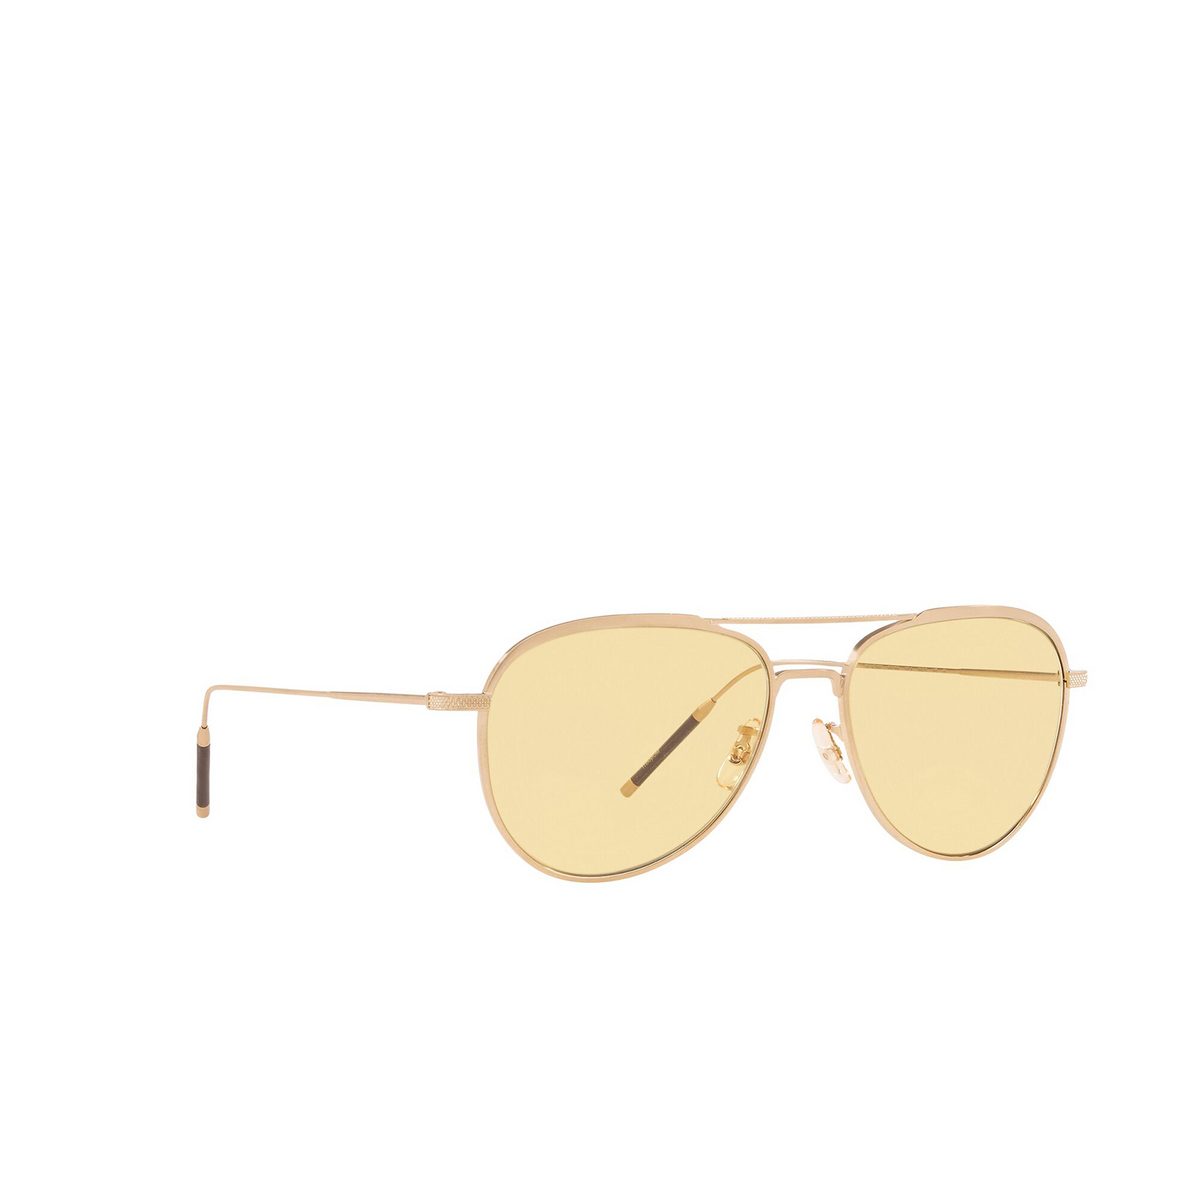 Oliver Peoples TK-3 Sunglasses 5311R6 Brushed Gold - three-quarters view